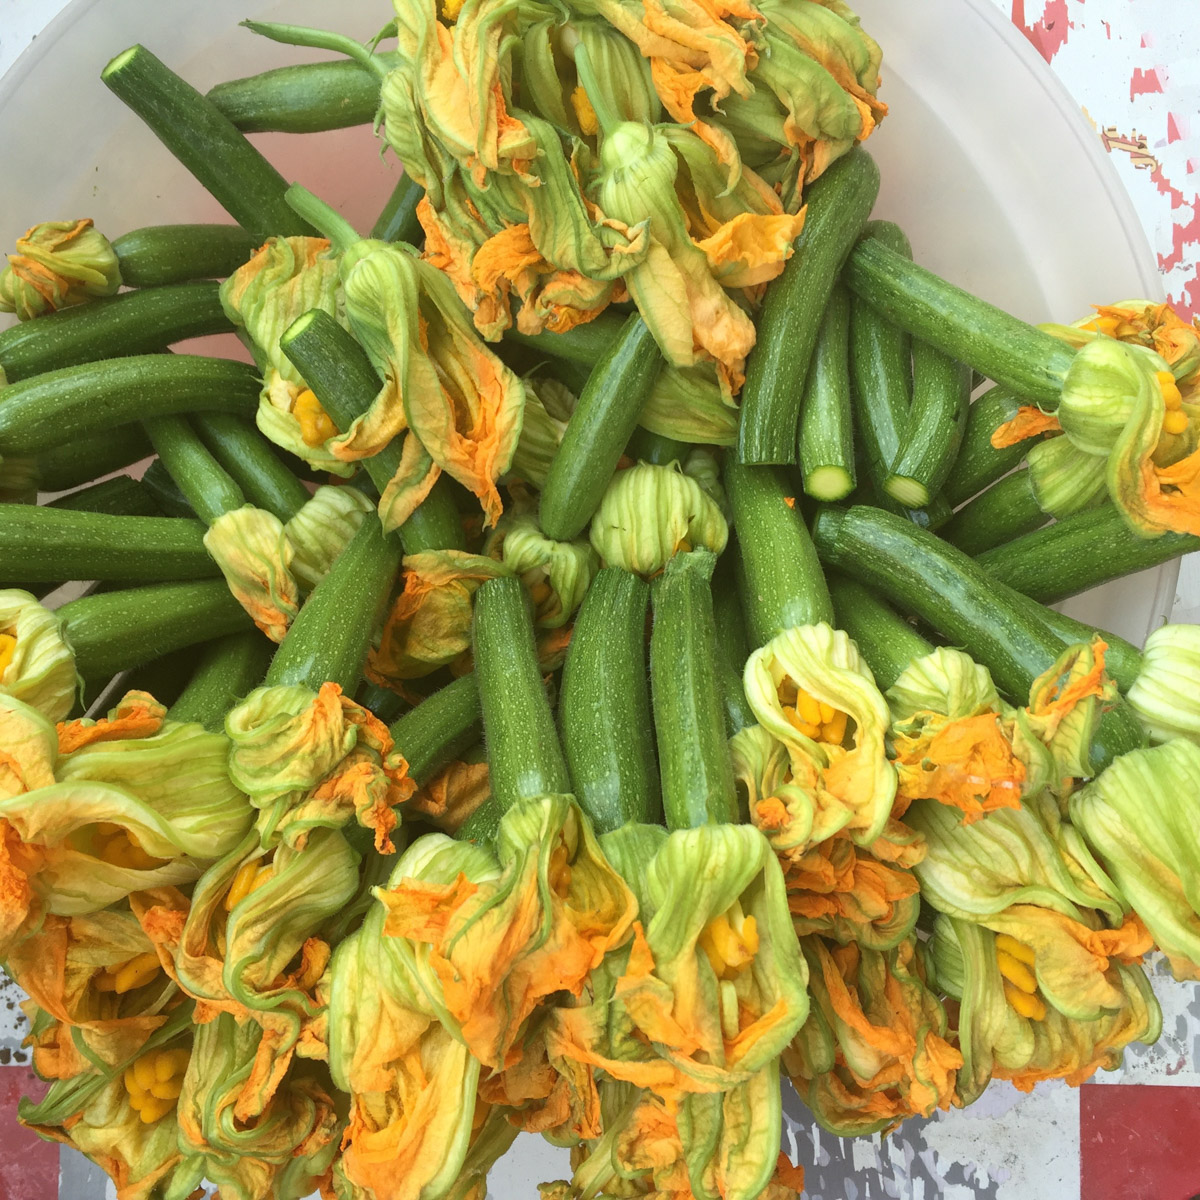 image of zucchini and flowers in a bowl.